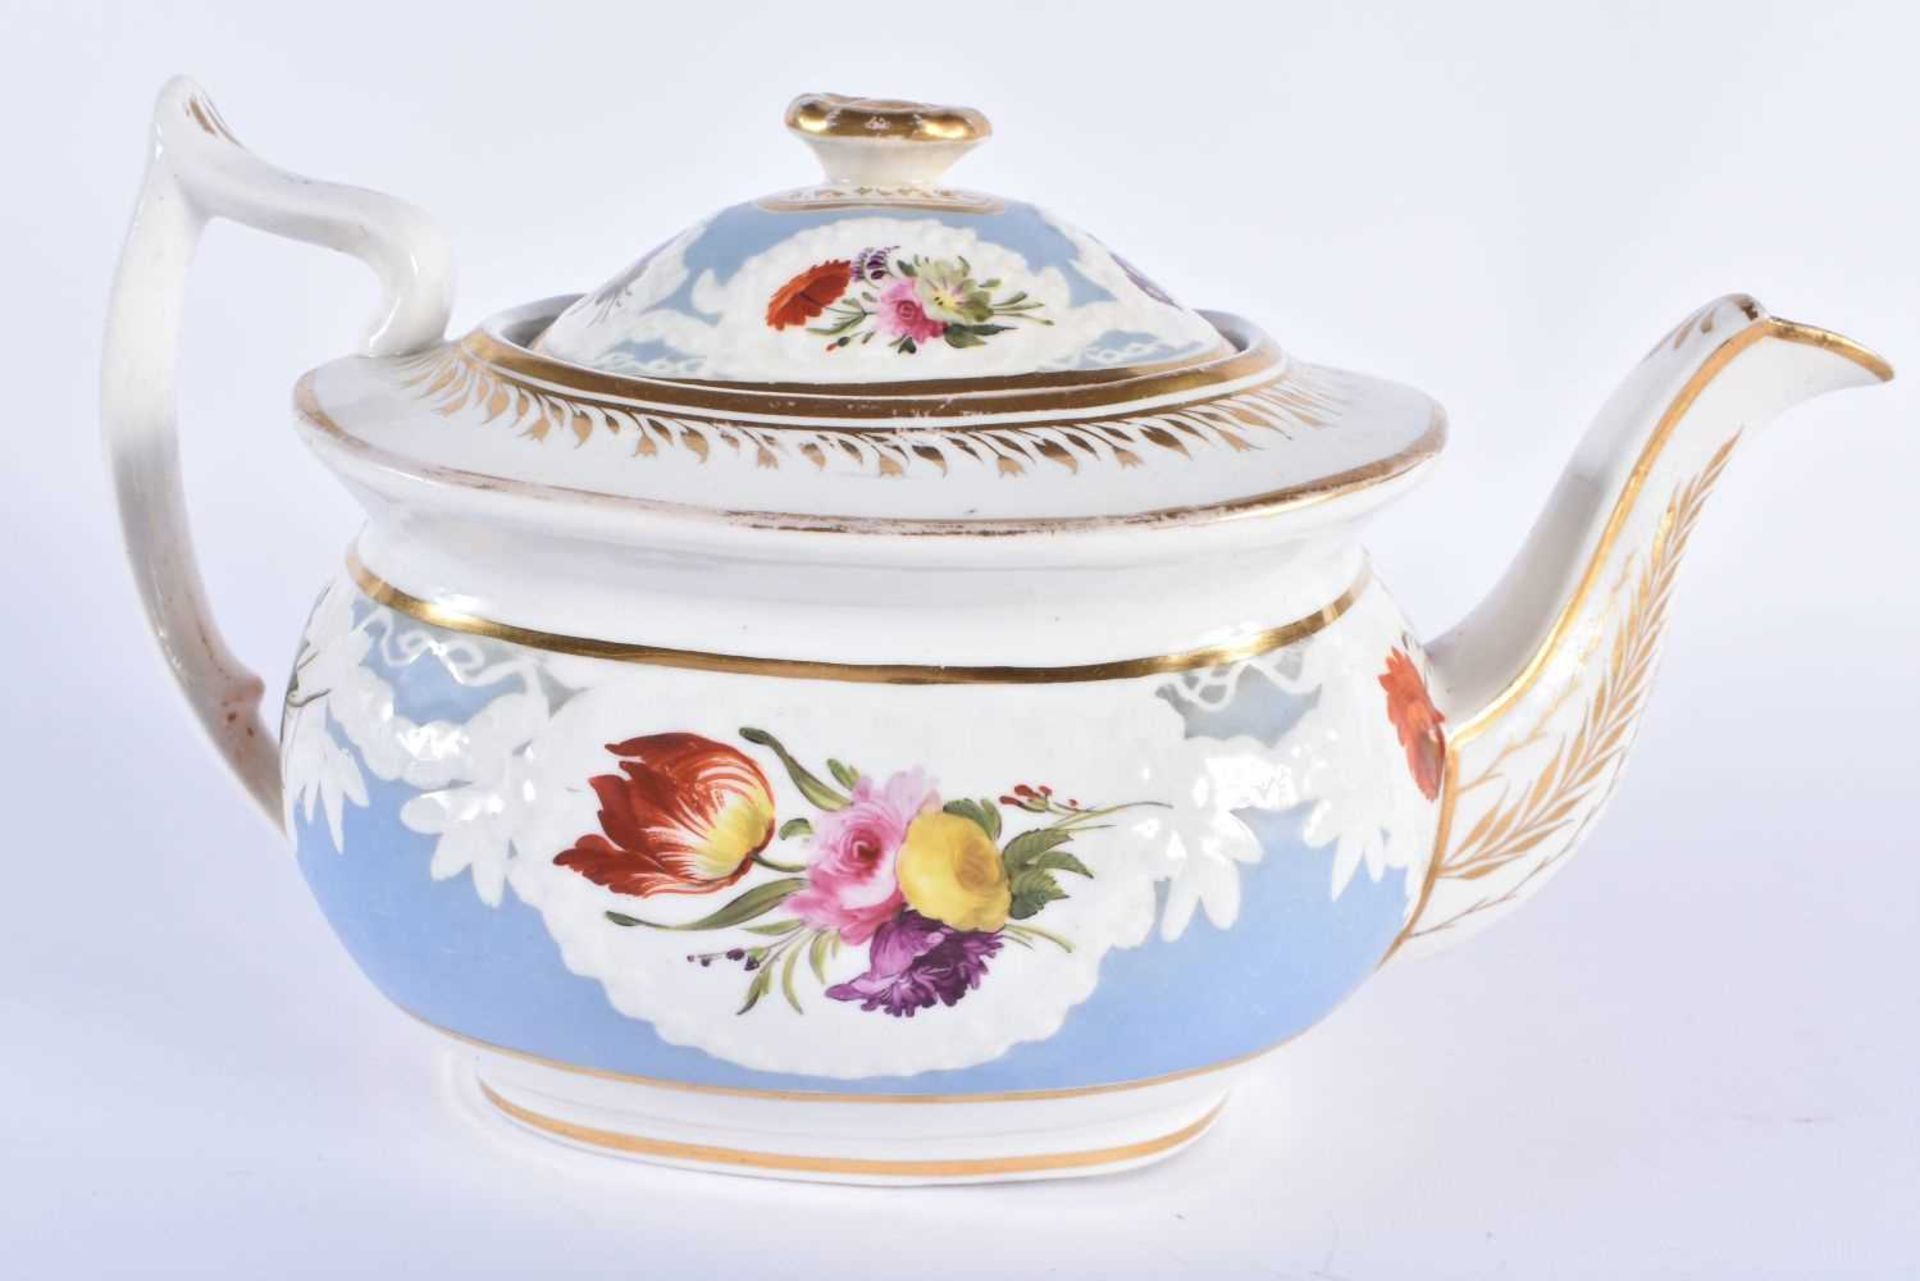 AN EARLY 19TH CENTURY CHAMBERLAINS WORCESTER PART TEASET painted with floral sprays, under a moulded - Image 10 of 36